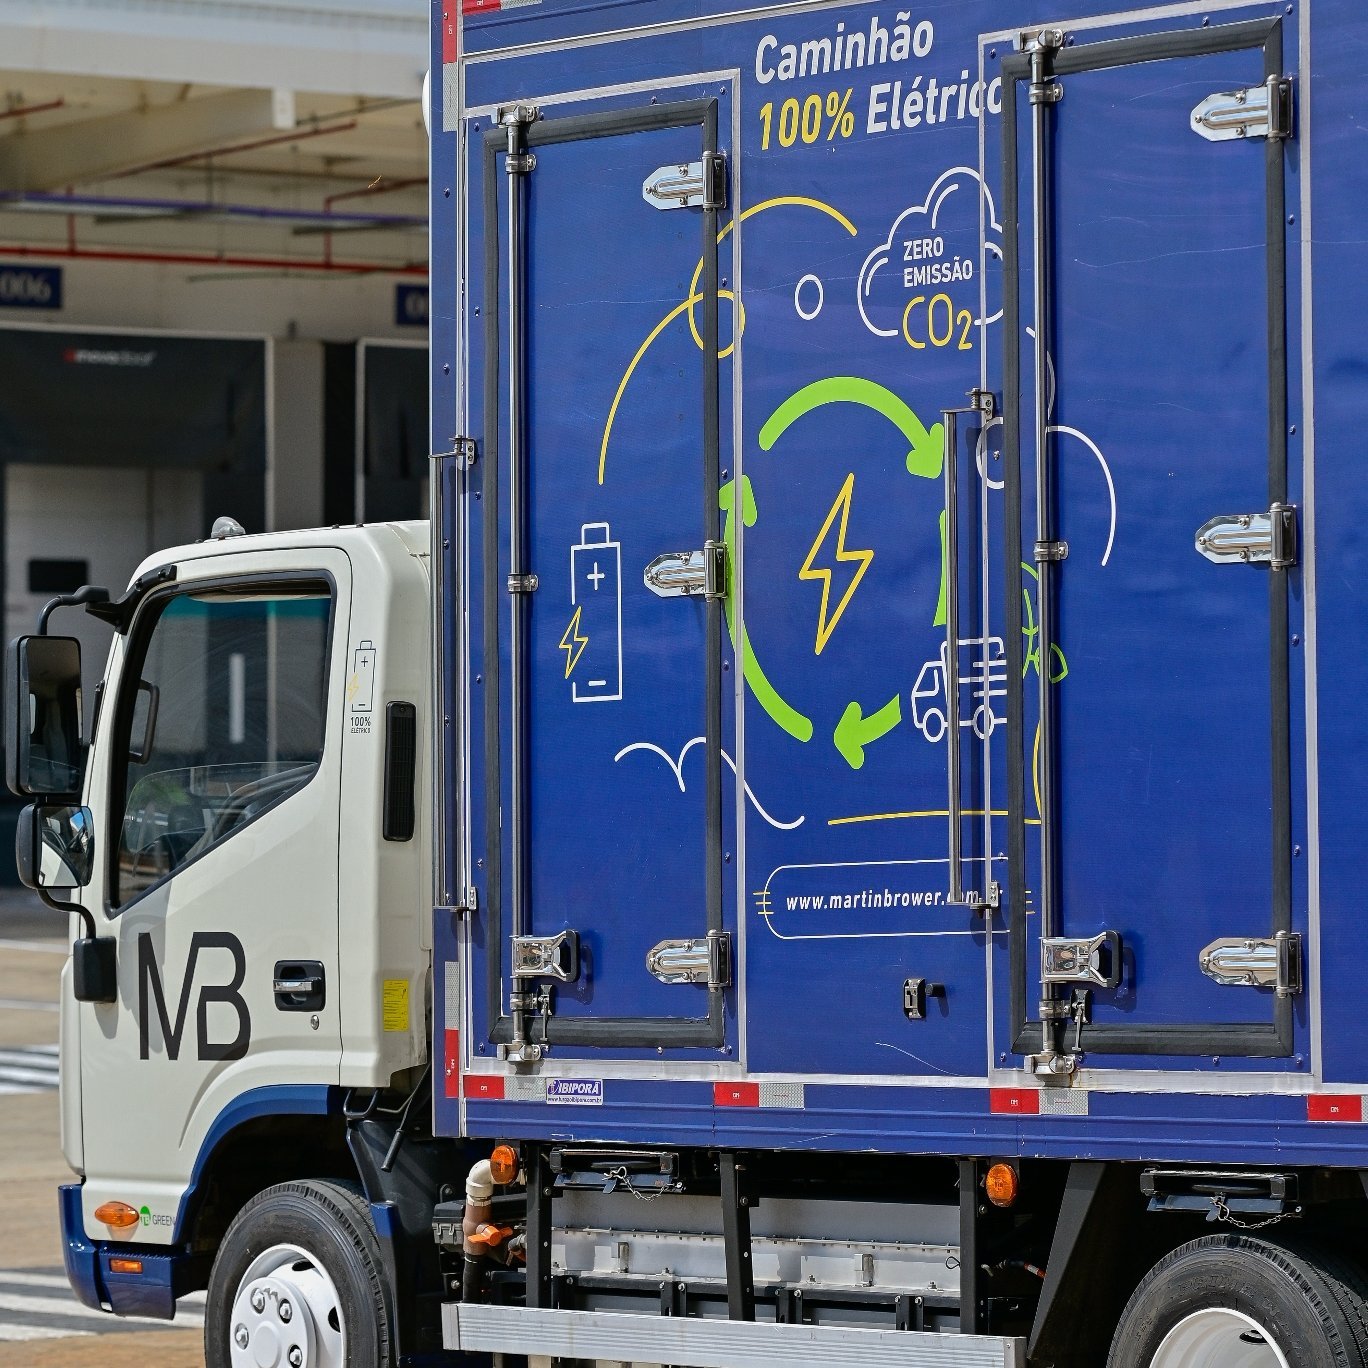 Electric truck with Martin Brower logo on it